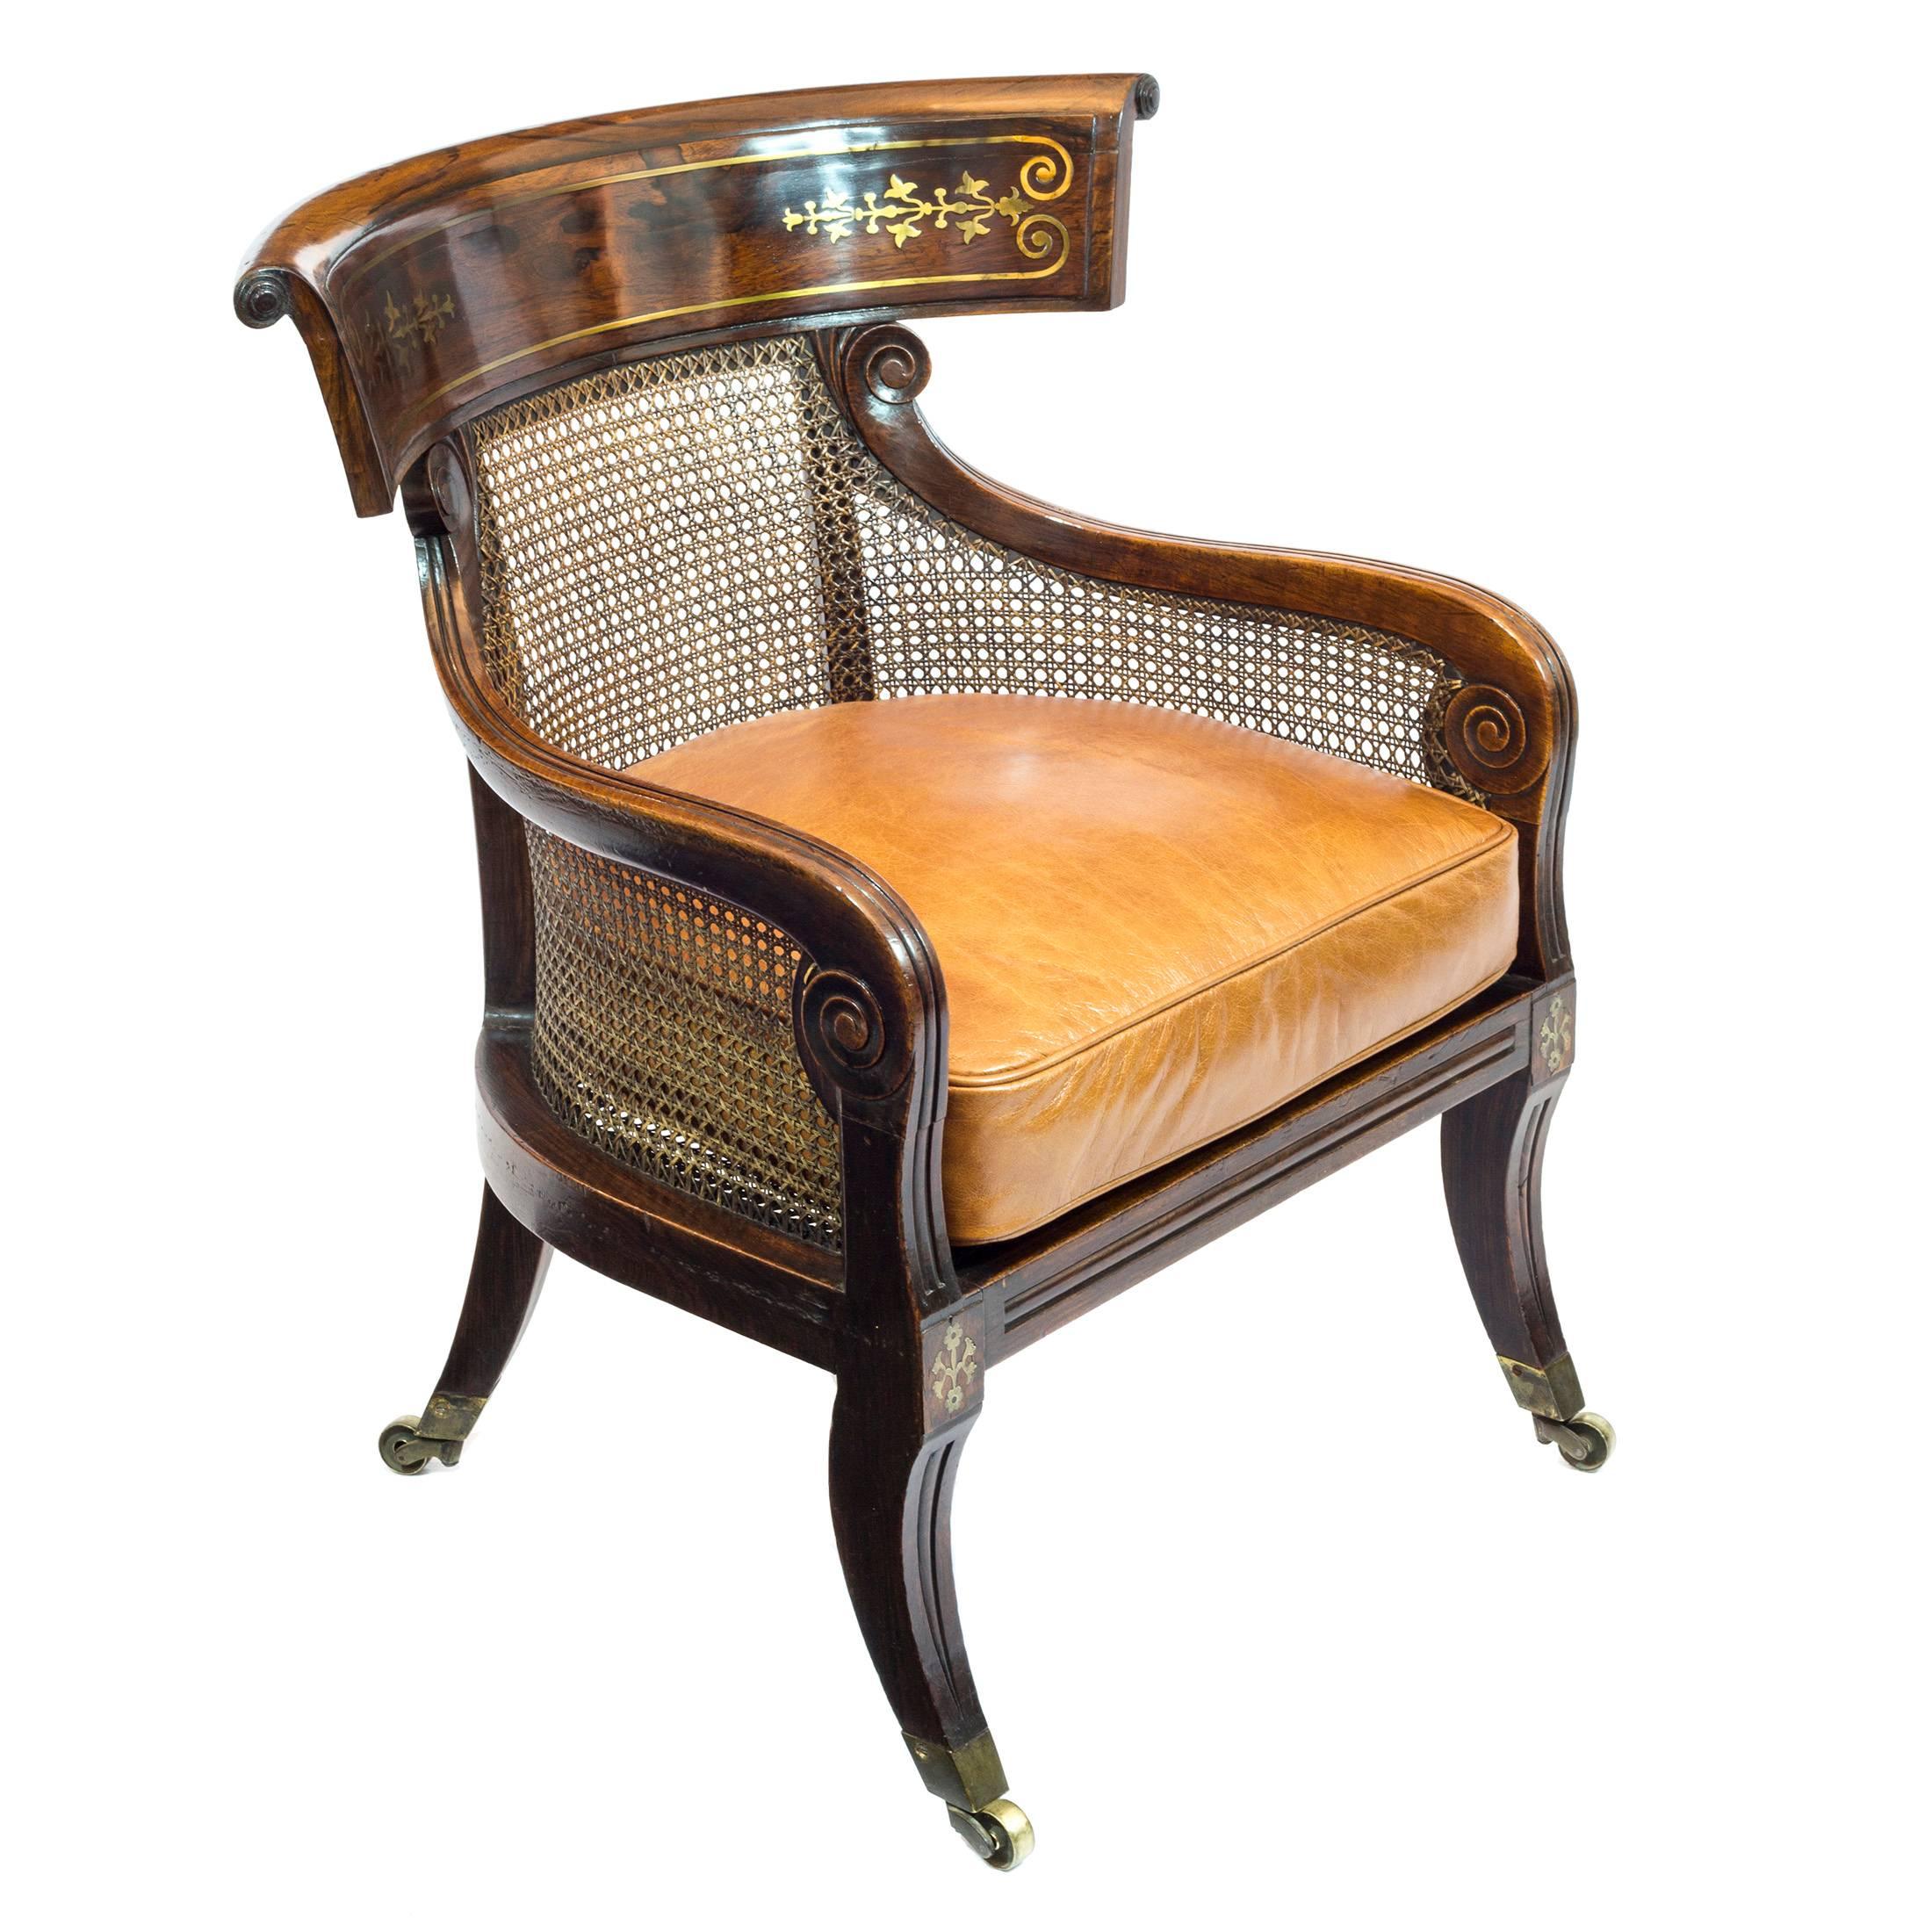 A fine Regency period simulated rosewood library tub Bergere, of Klismos form, attributed to William Wilkinson of Ludgate Hill, London.
 
English, circa 1815.
 
The open beech showframe, dark grained to simulate rosewood, caned throughout, having